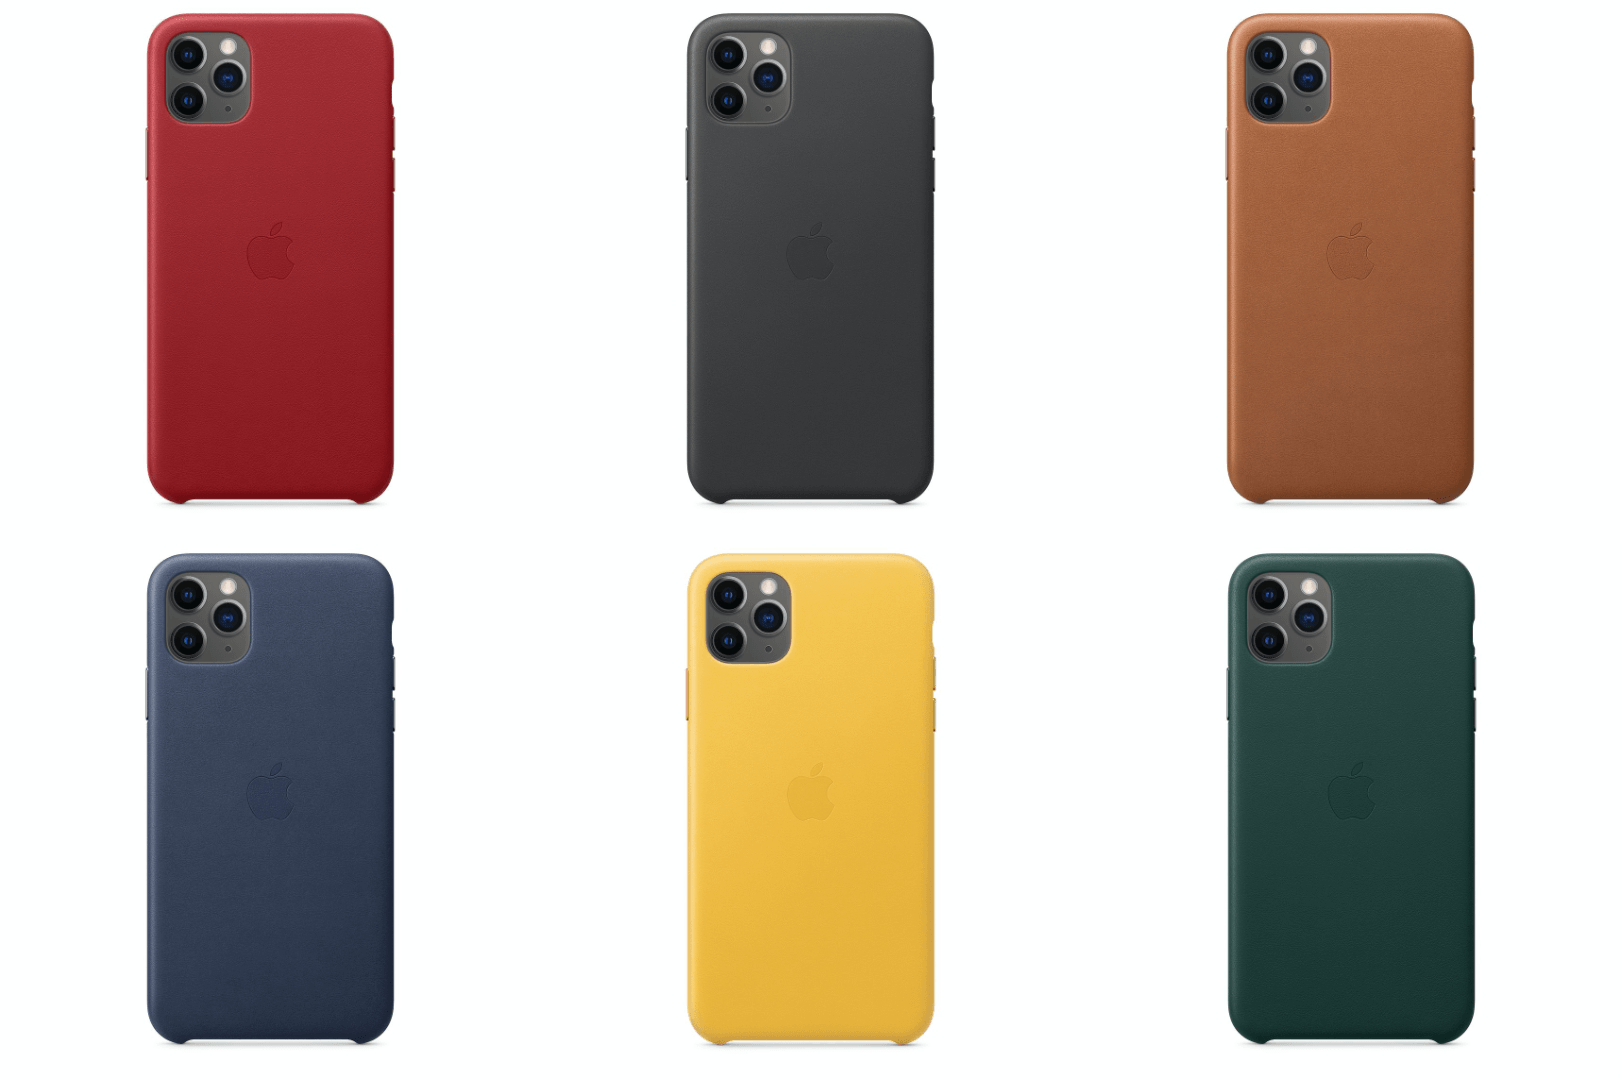 Product Red, Black, Saddle Brown, Midnight Blue, Forest Green, and Meyer Lemon.